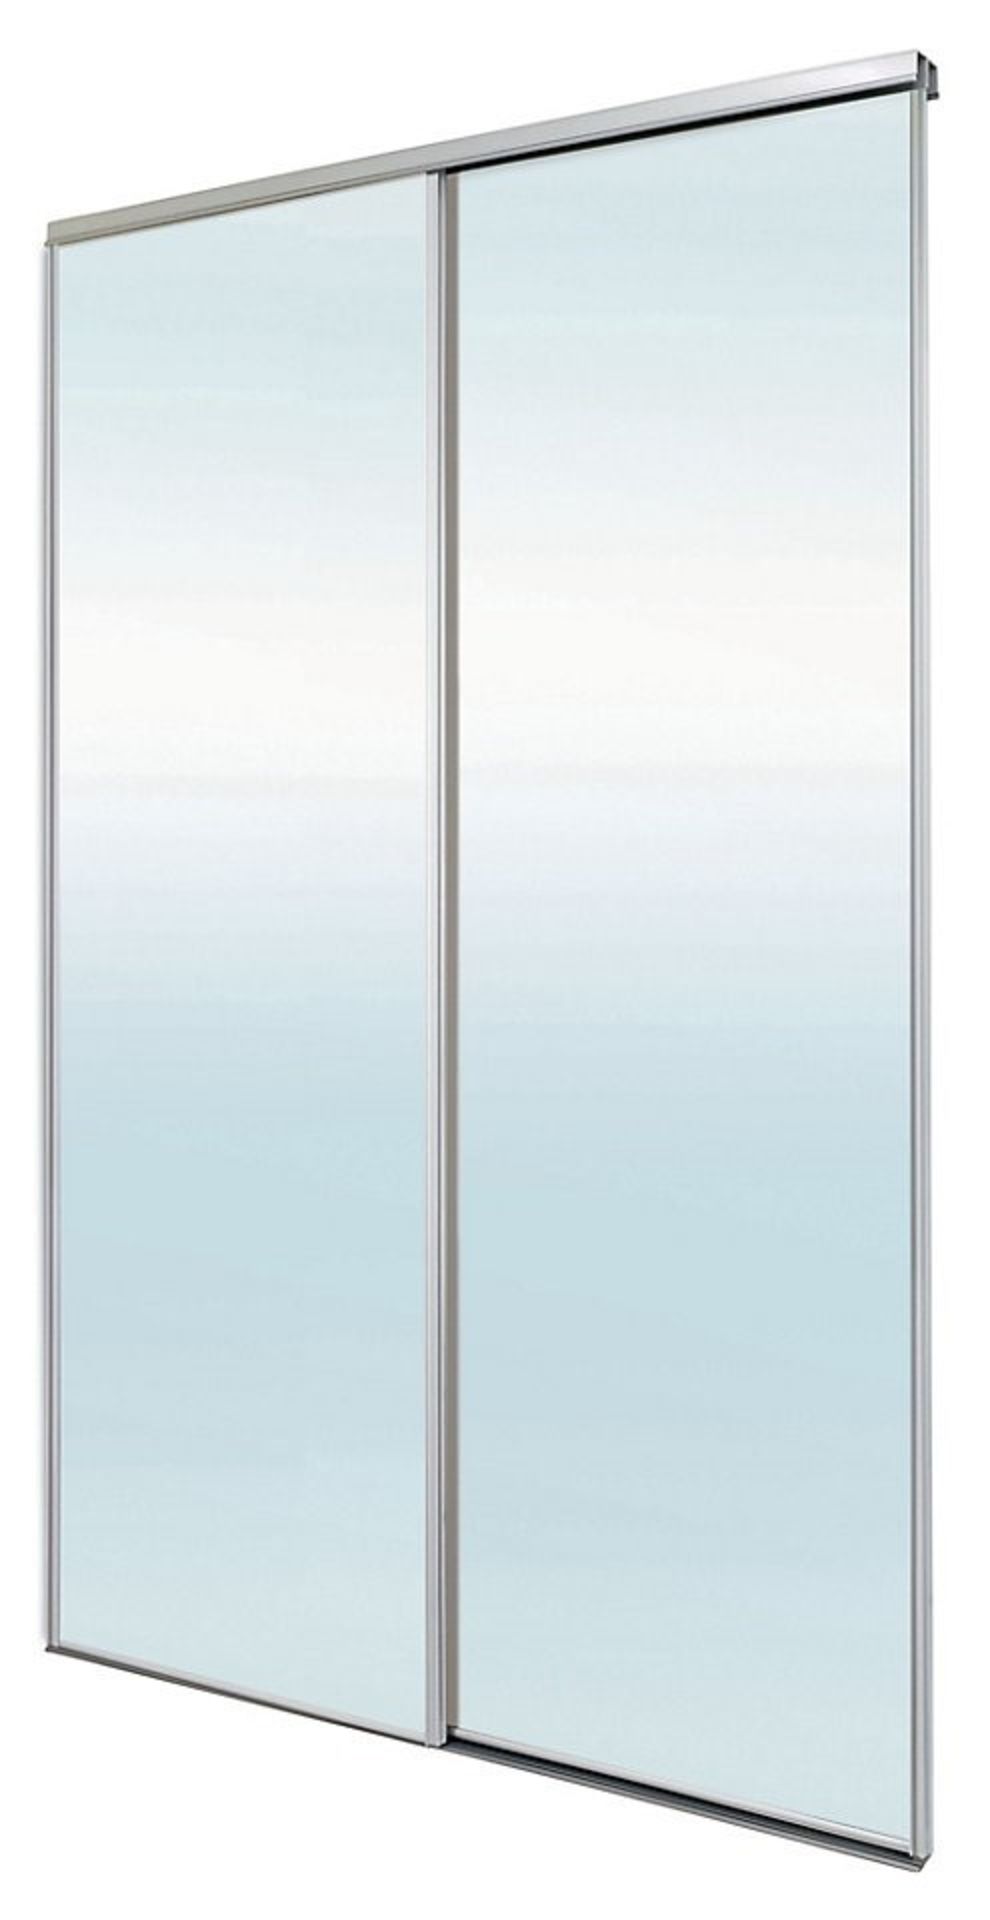 1 x BLIZZ Pack of 2 Silver Mirror Sliding Wardrobe Doors With Grey Lacquered Steel Track Sets and Pr